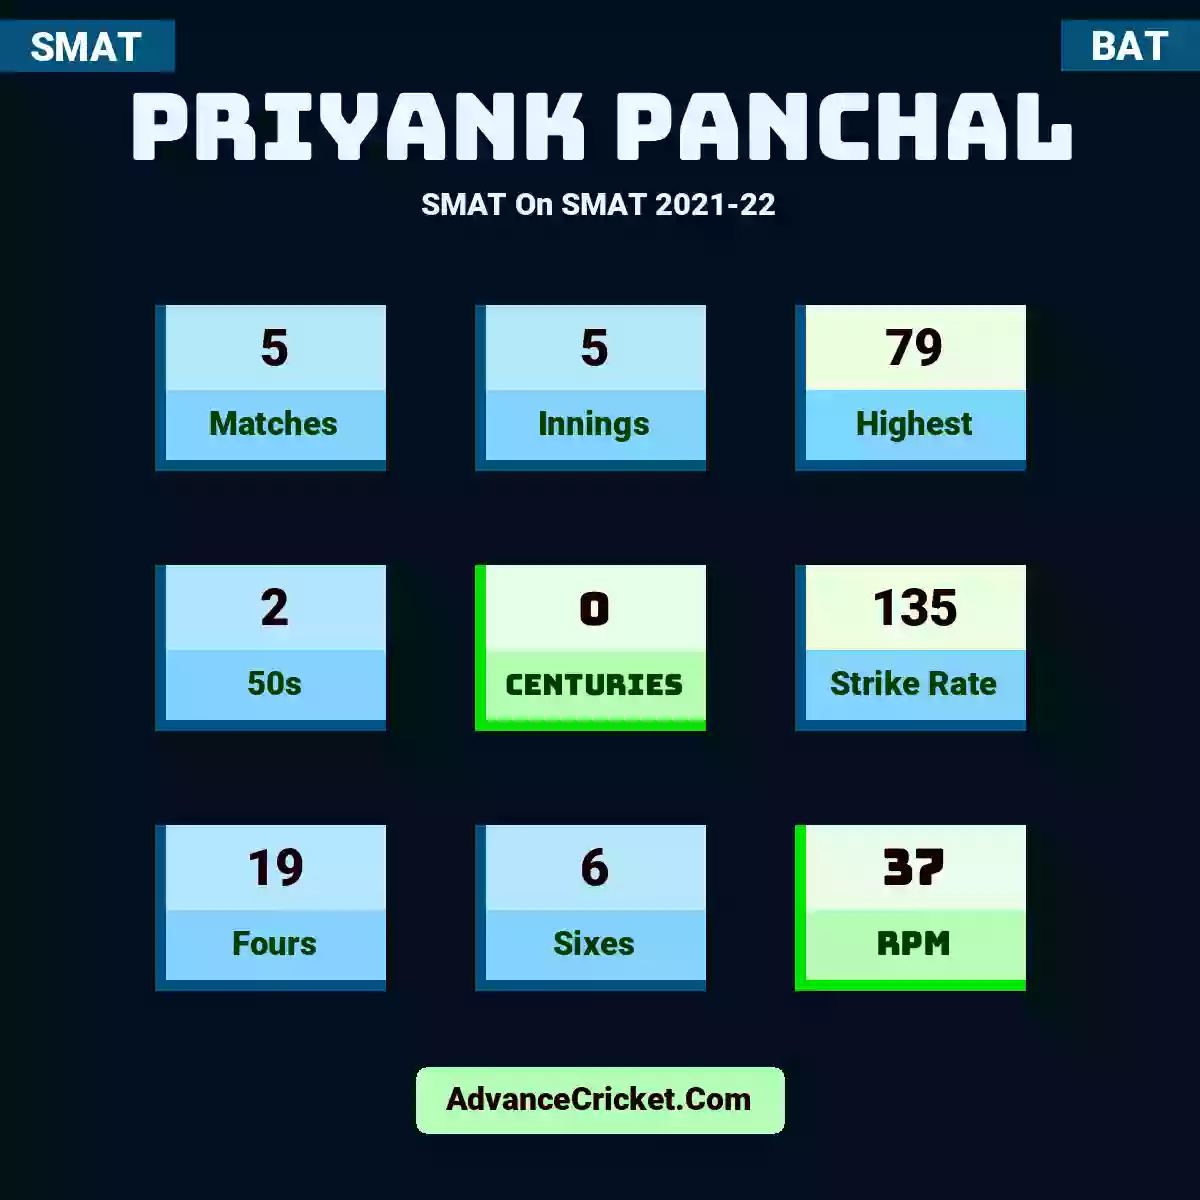 Priyank Panchal SMAT  On SMAT 2021-22, Priyank Panchal played 5 matches, scored 79 runs as highest, 2 half-centuries, and 0 centuries, with a strike rate of 135. P.Panchal hit 19 fours and 6 sixes, with an RPM of 37.